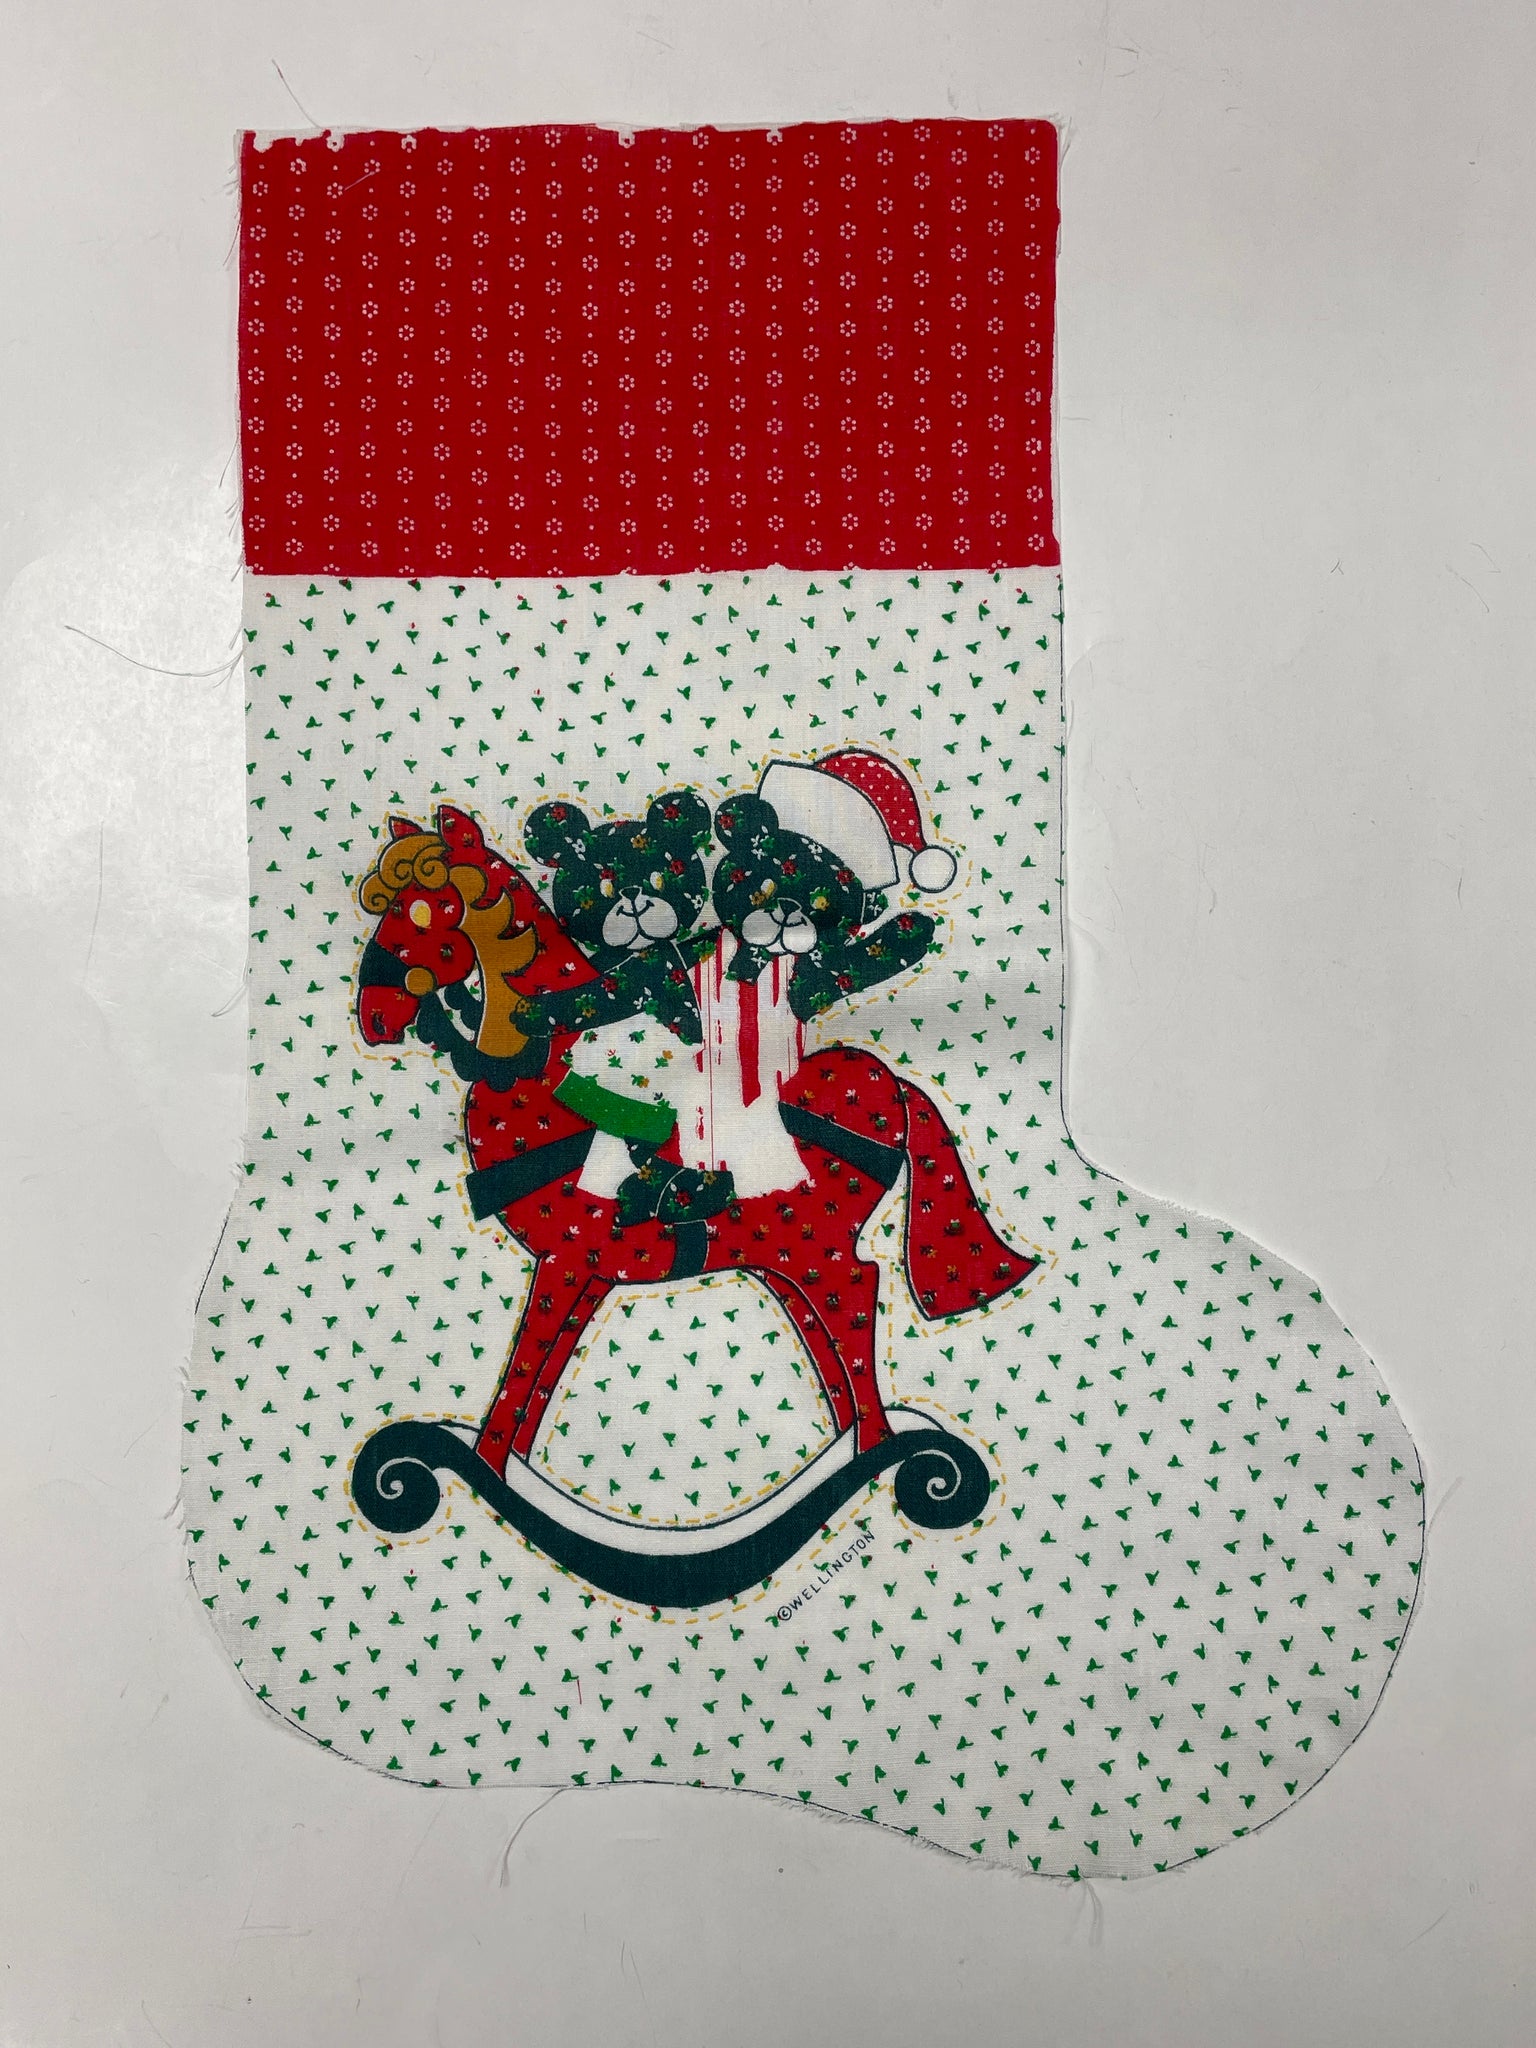 Poly/Cotton Christmas Stocking Panel Vintage - Red and White Calicos With Teddy Bears on Rocking a Horse